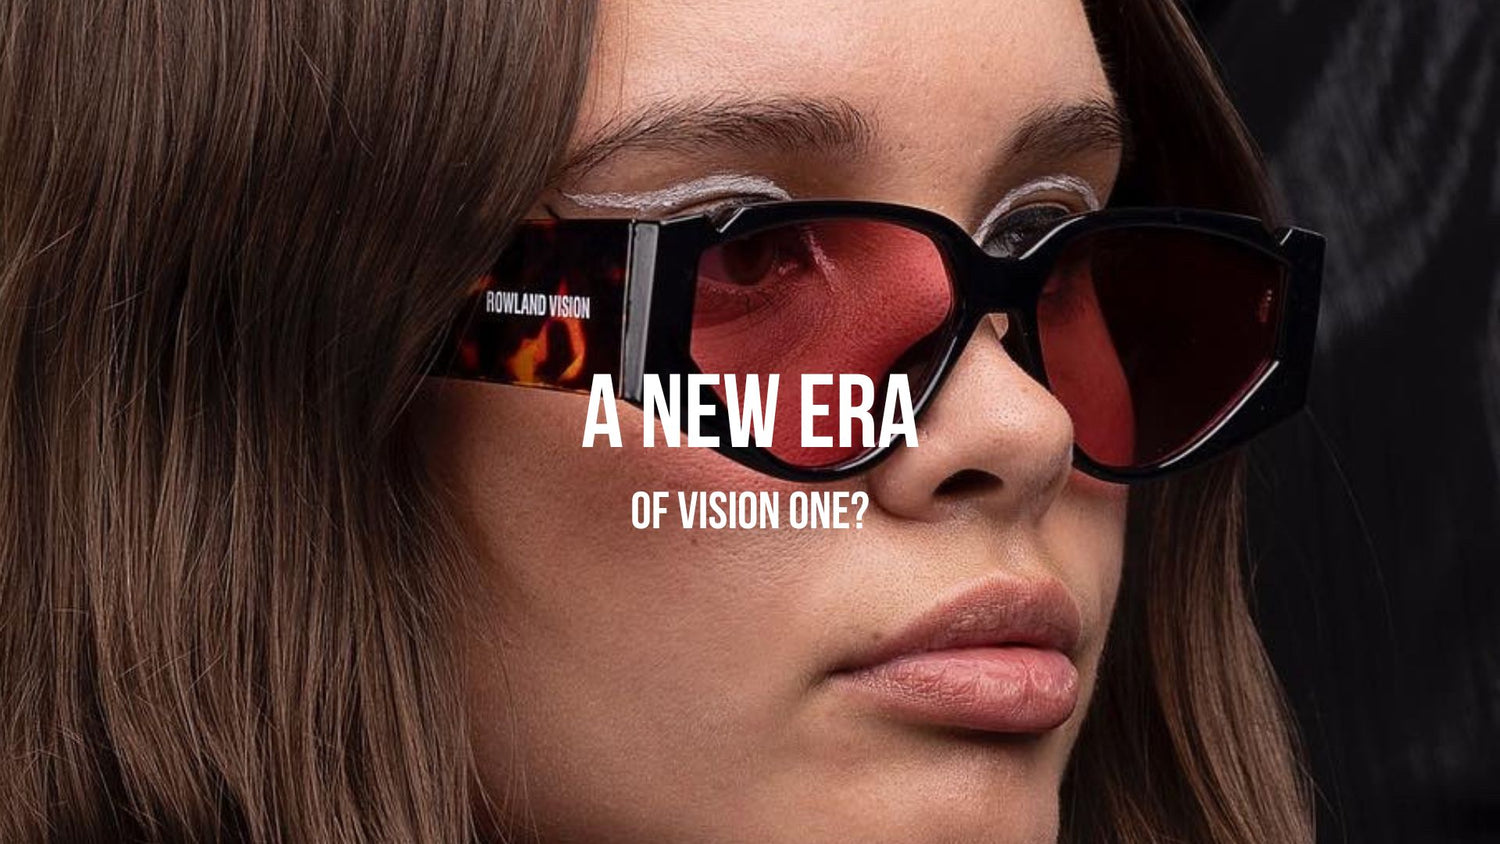 A NEW ERA OF VISION ONE